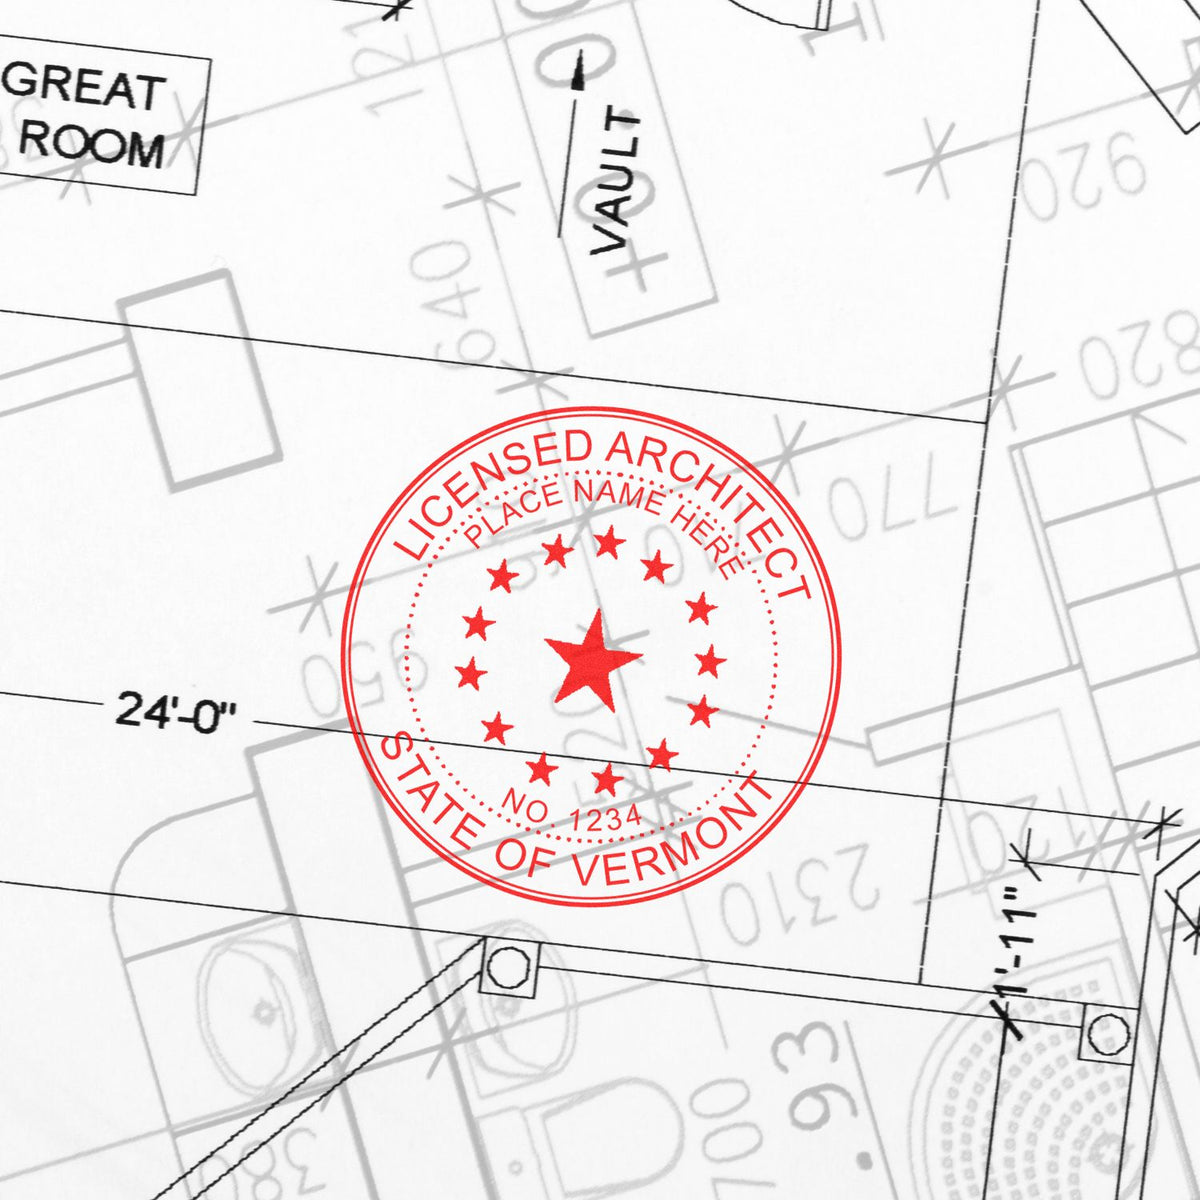 The Slim Pre-Inked Vermont Architect Seal Stamp stamp impression comes to life with a crisp, detailed photo on paper - showcasing true professional quality.